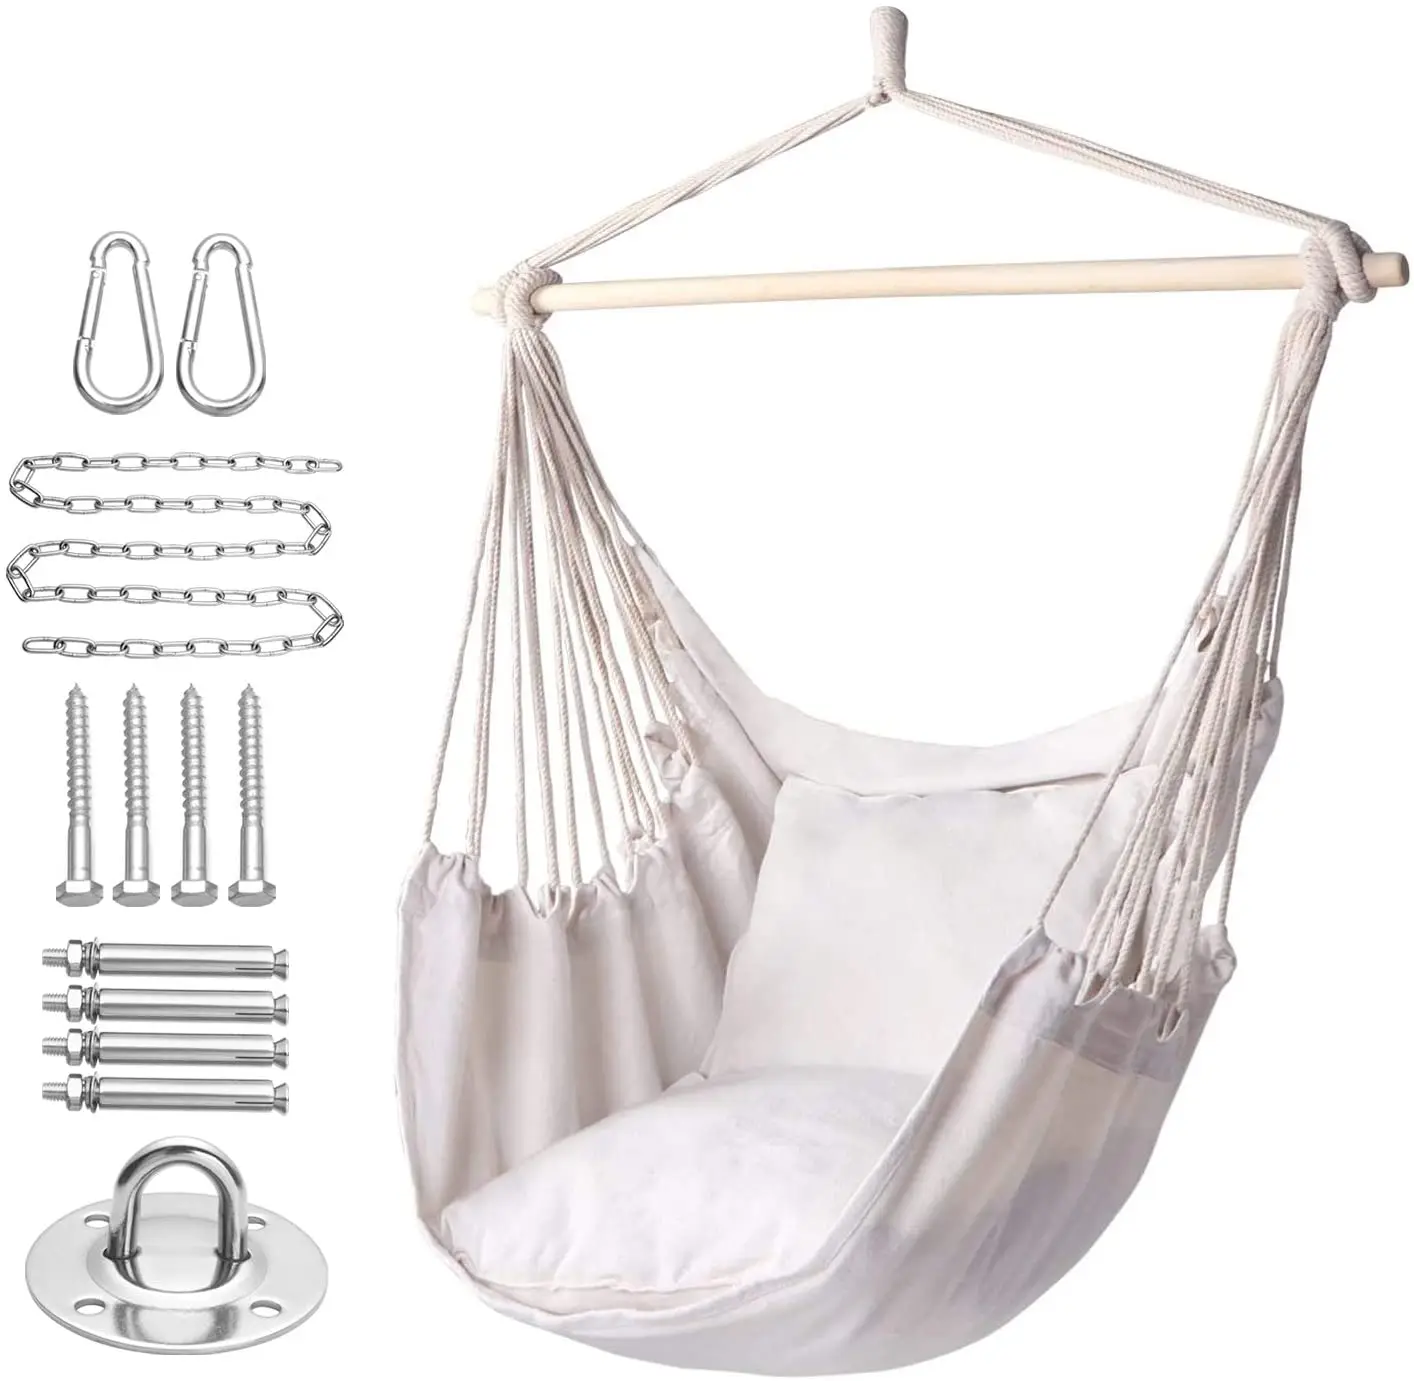 

Hammock Chair Hanging Rope Swing, Max 320 Lbs, 2 Seat Cushions Included, Hanging Chair with Pocket, Quality Cotton Weave